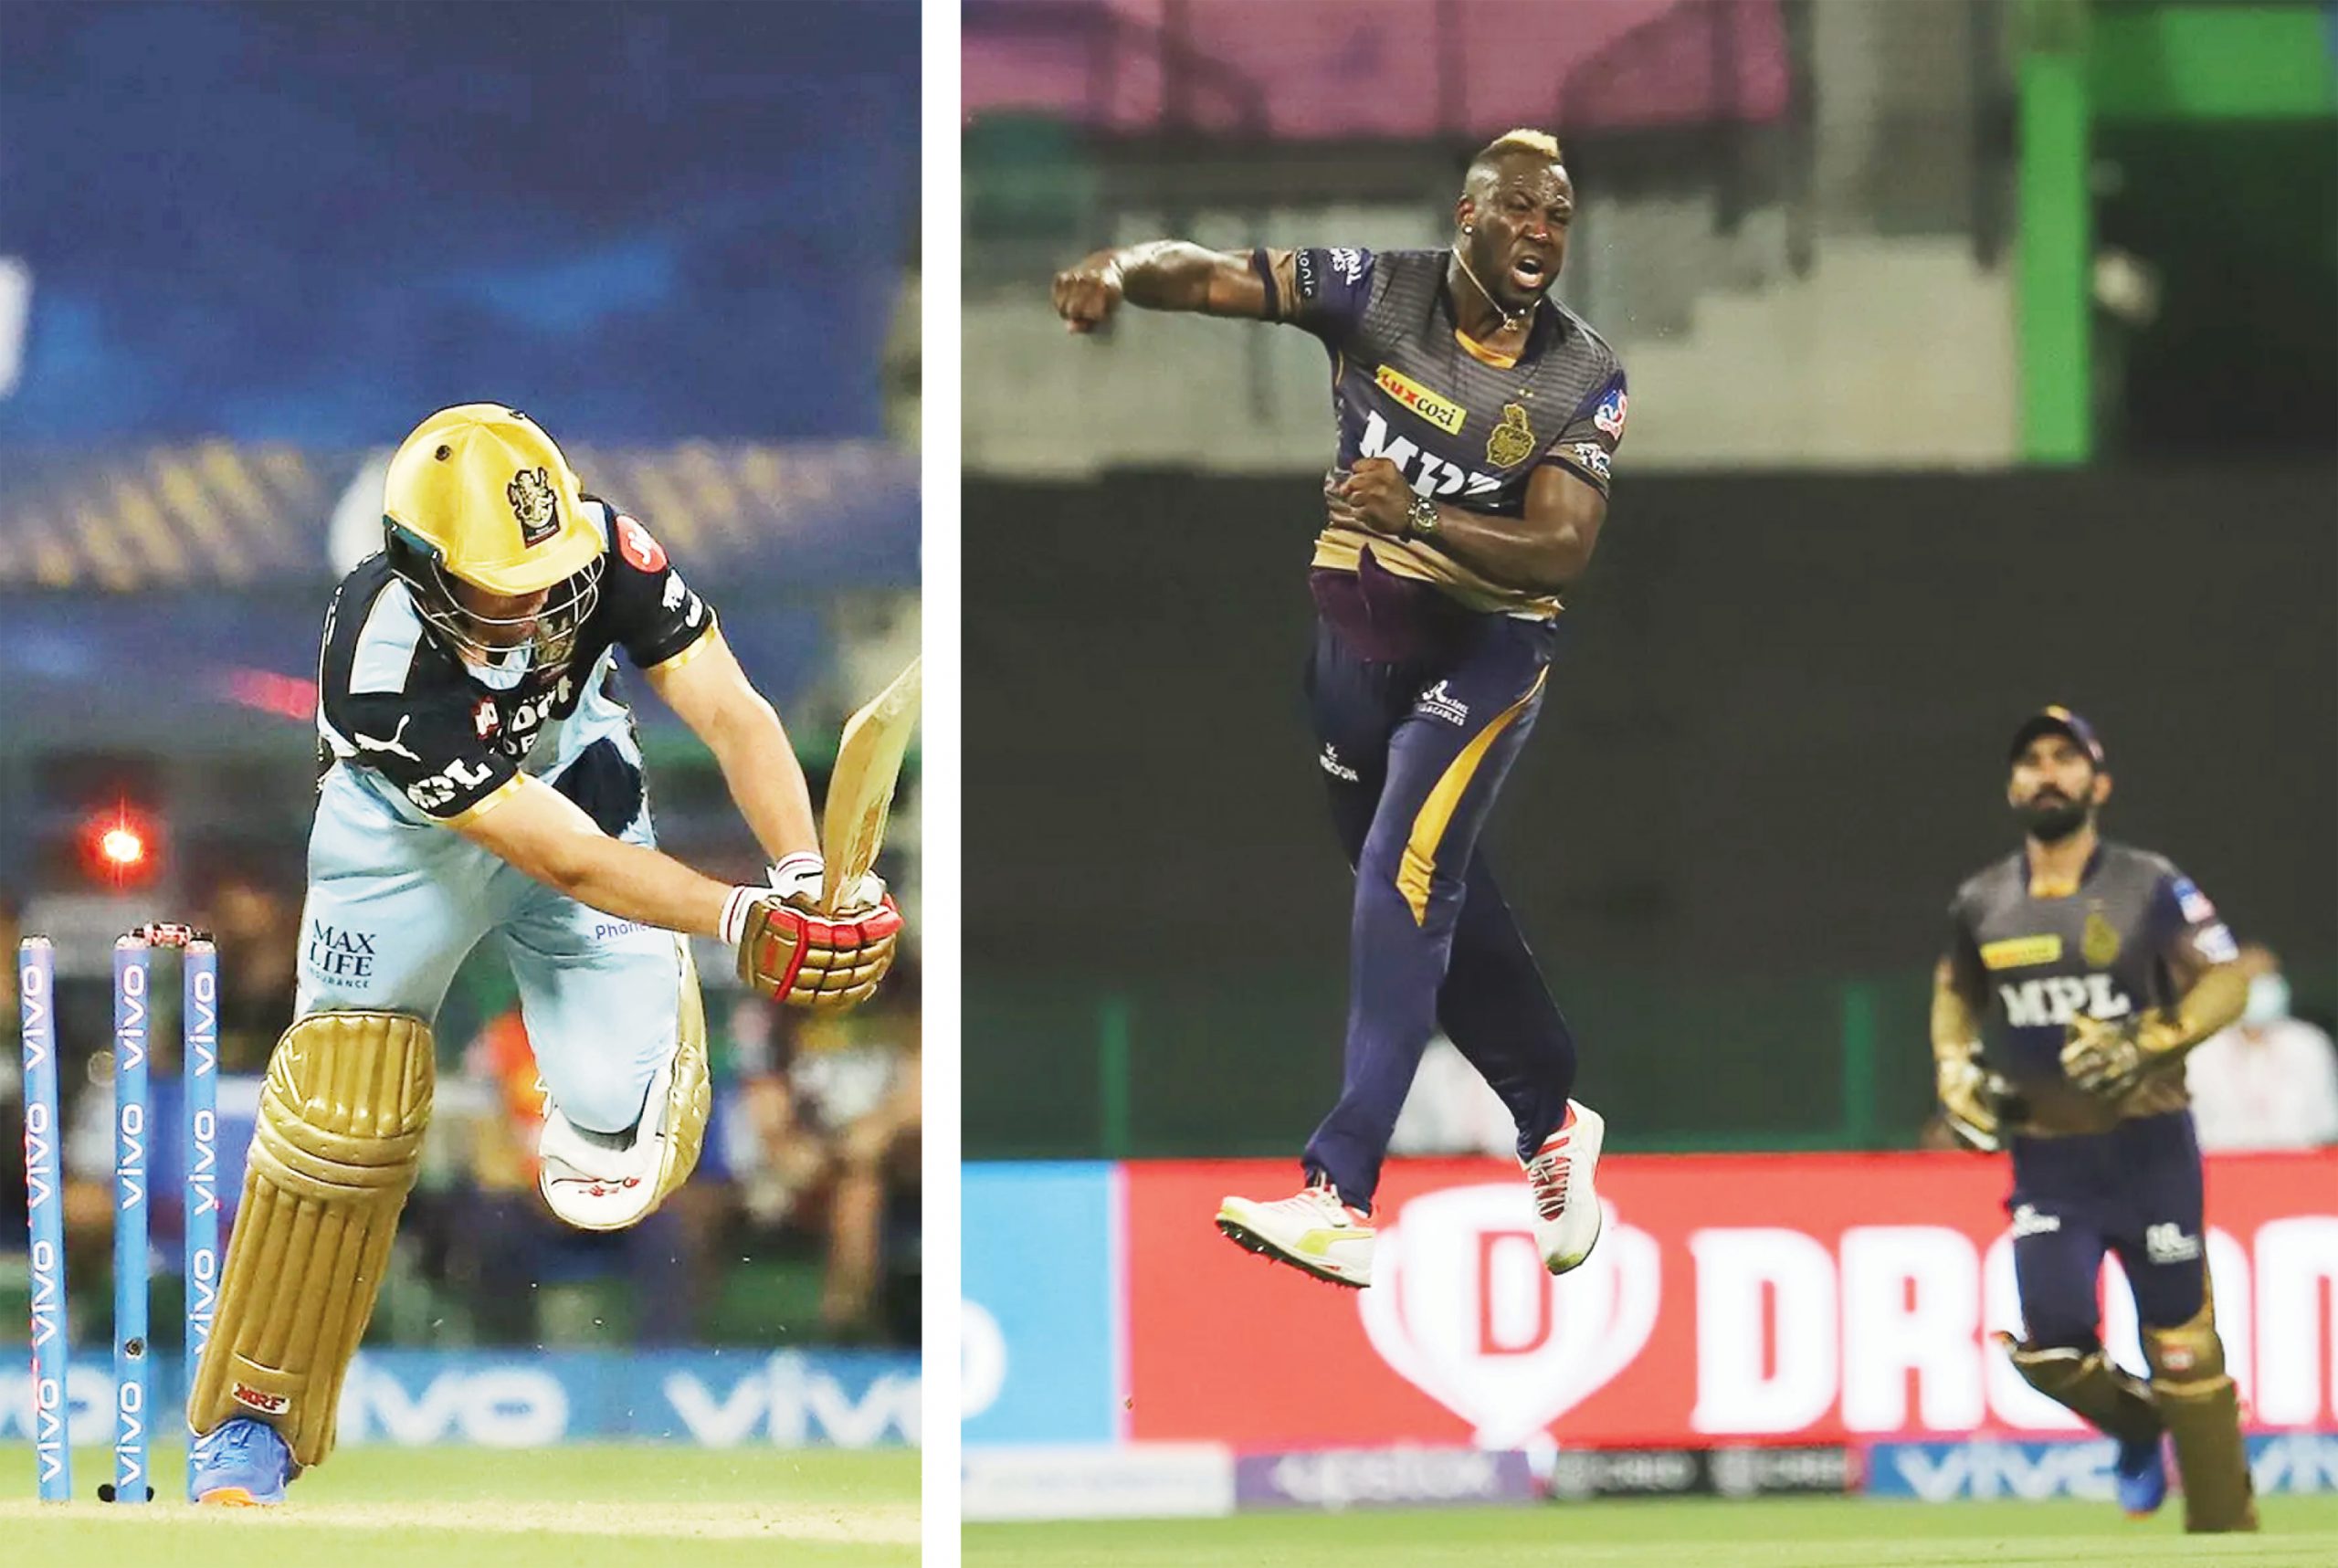 Kolkata: KKR's Andre Russell celebrates after taking the wicket of